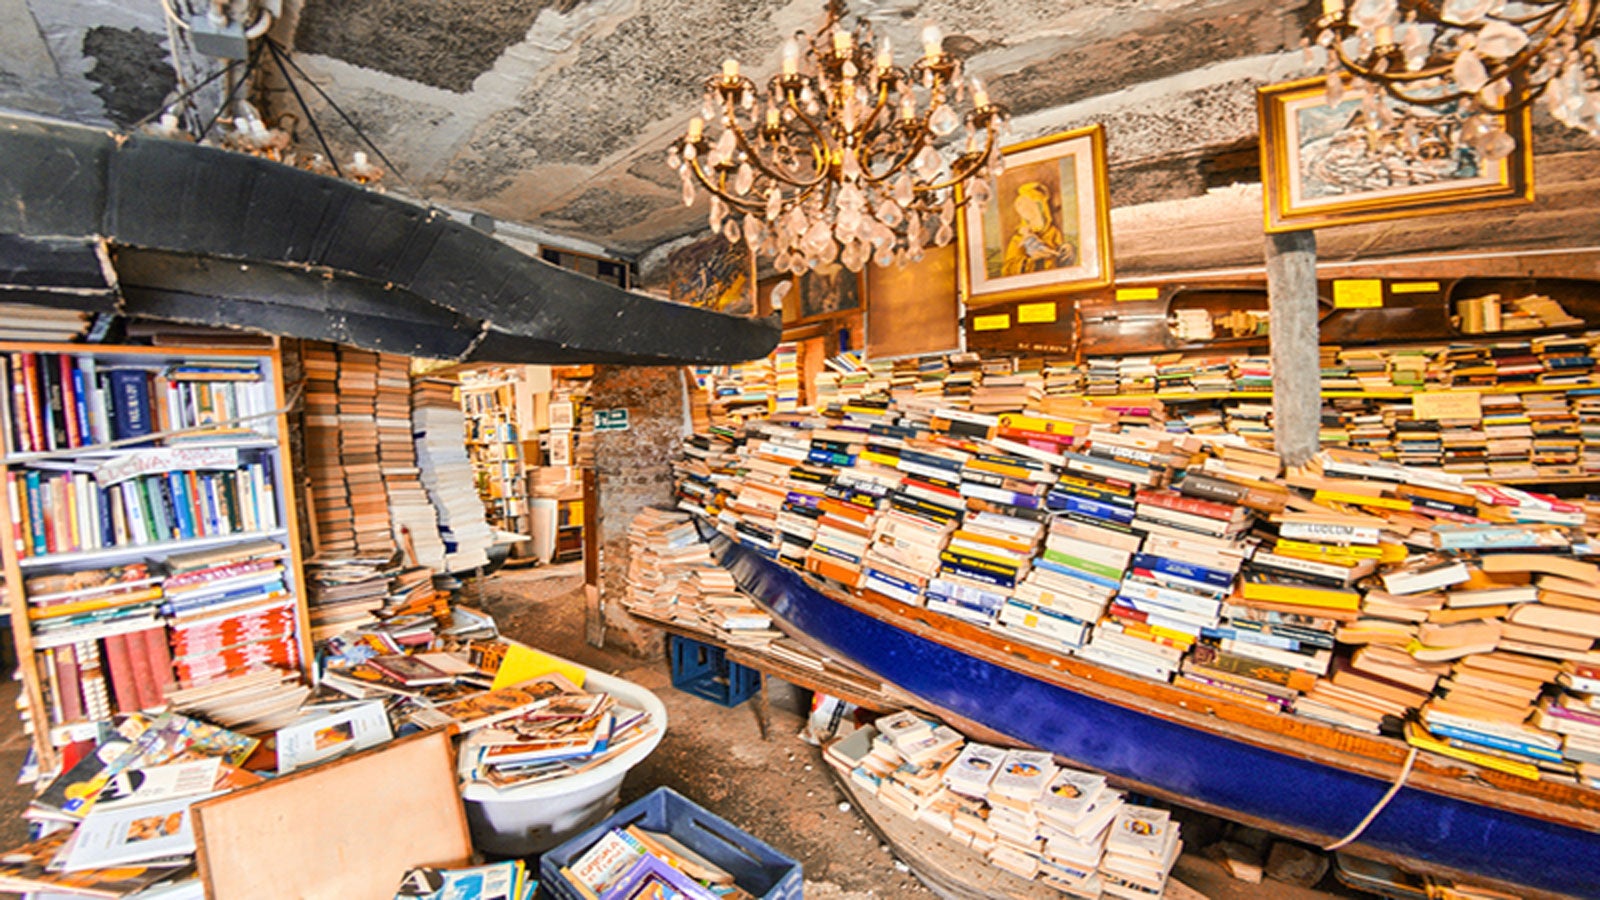 a crowded second hand bookshop wth a row-boat crammed full of books n the centre of the room